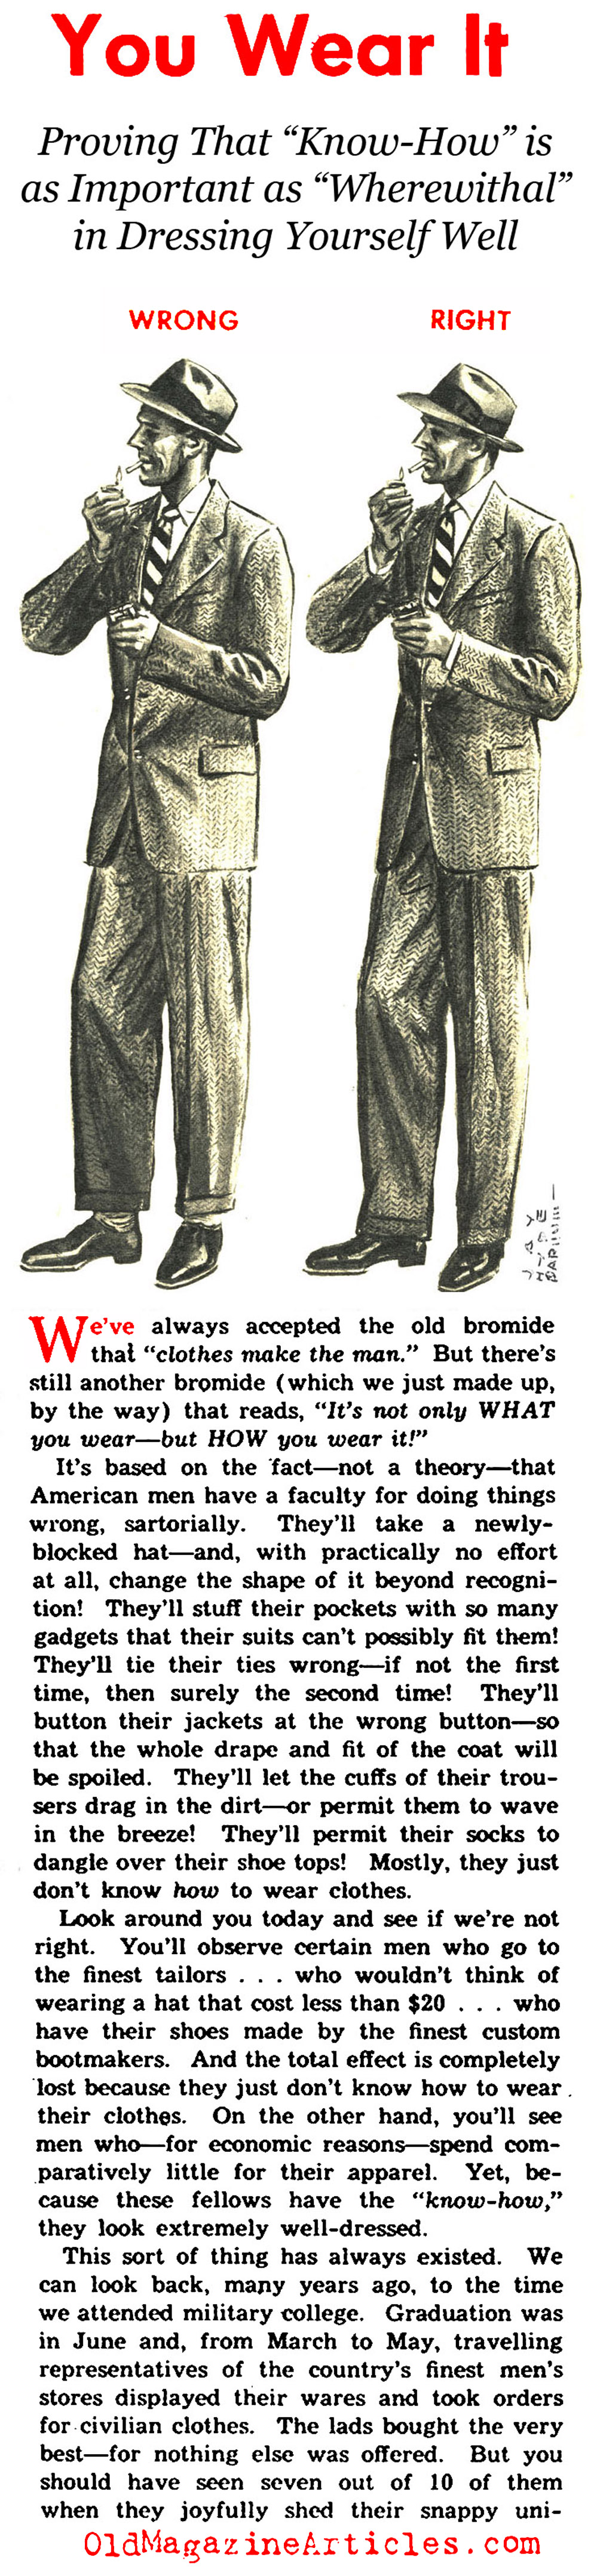 The Dos and Don't in Men's Suiting of the Forties (Pic Magazine, 1945)